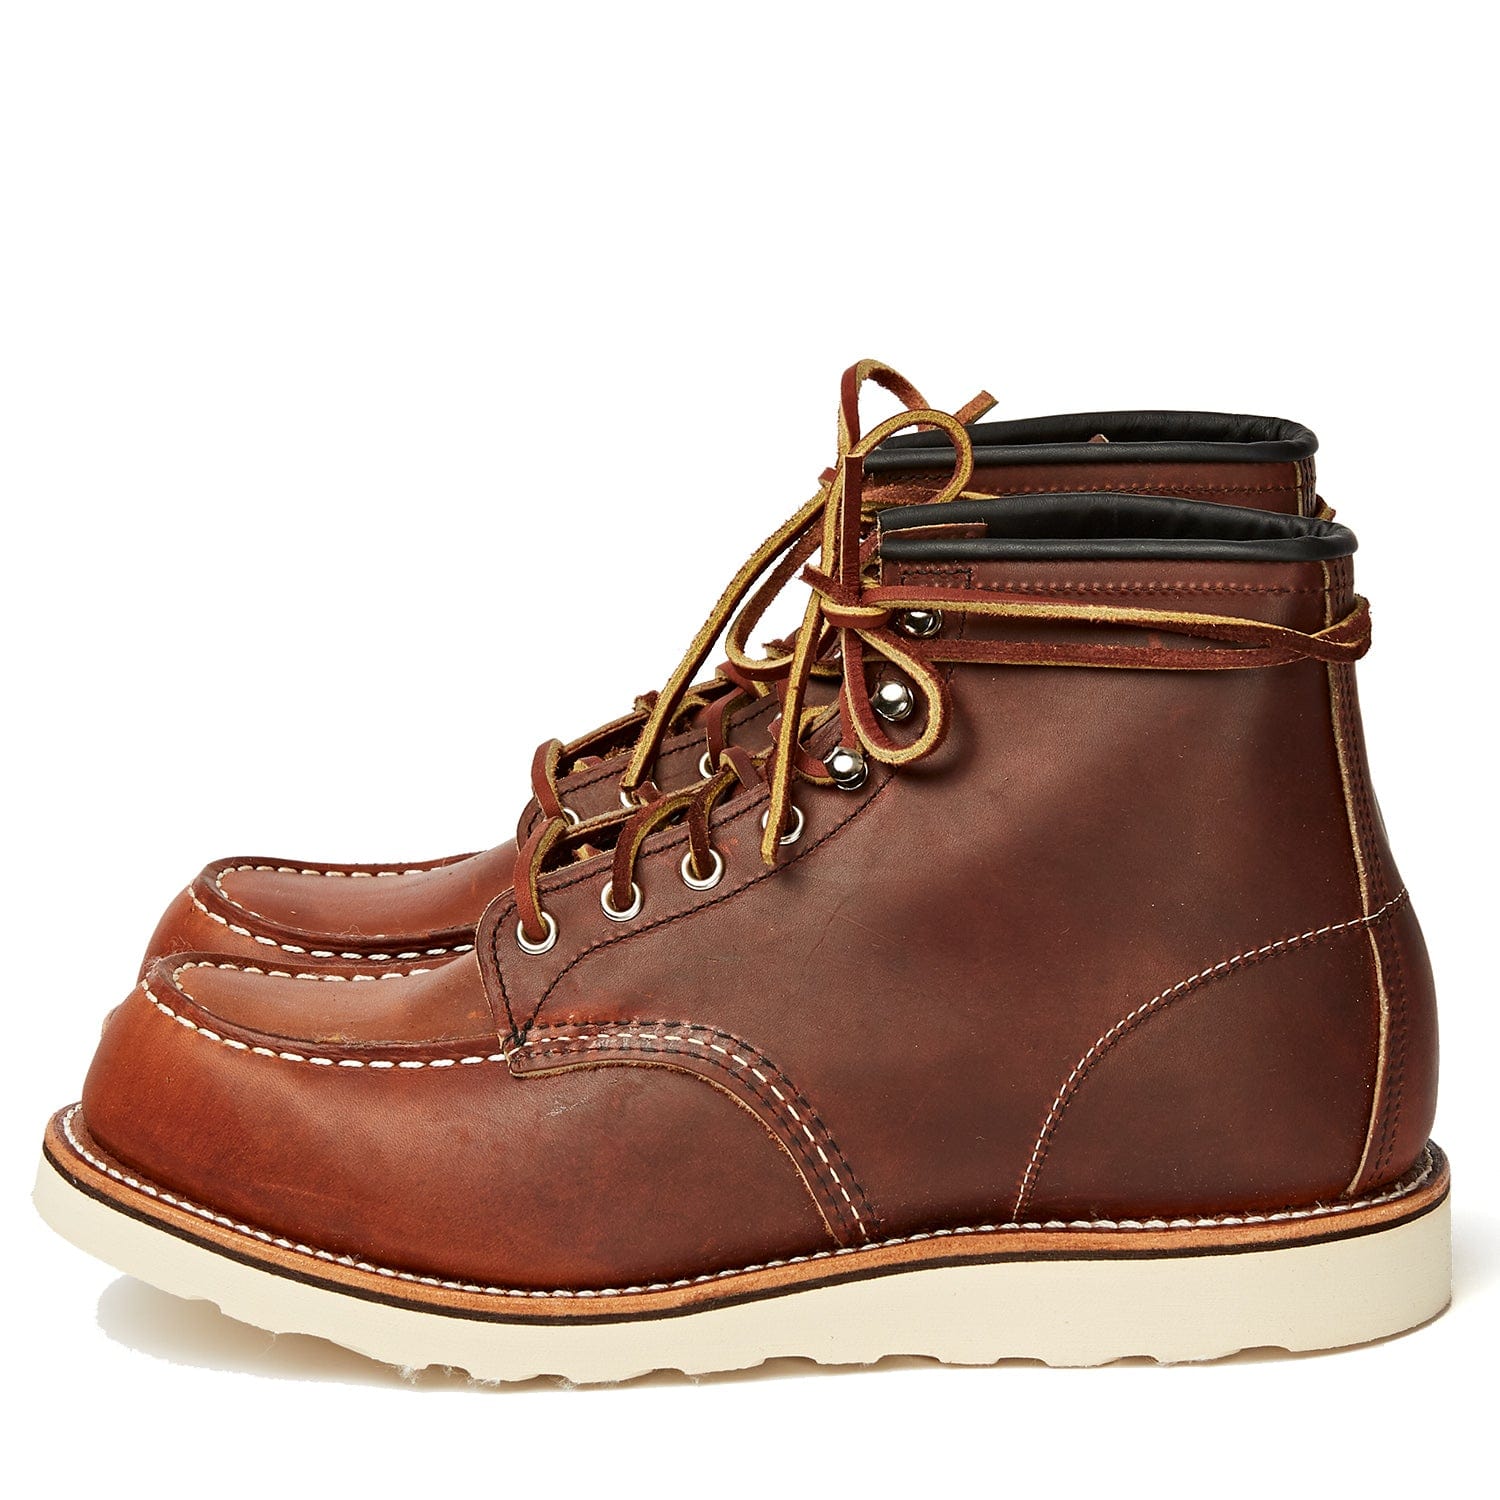 ✅　Red Wing 875 アメリカ製　US9.5